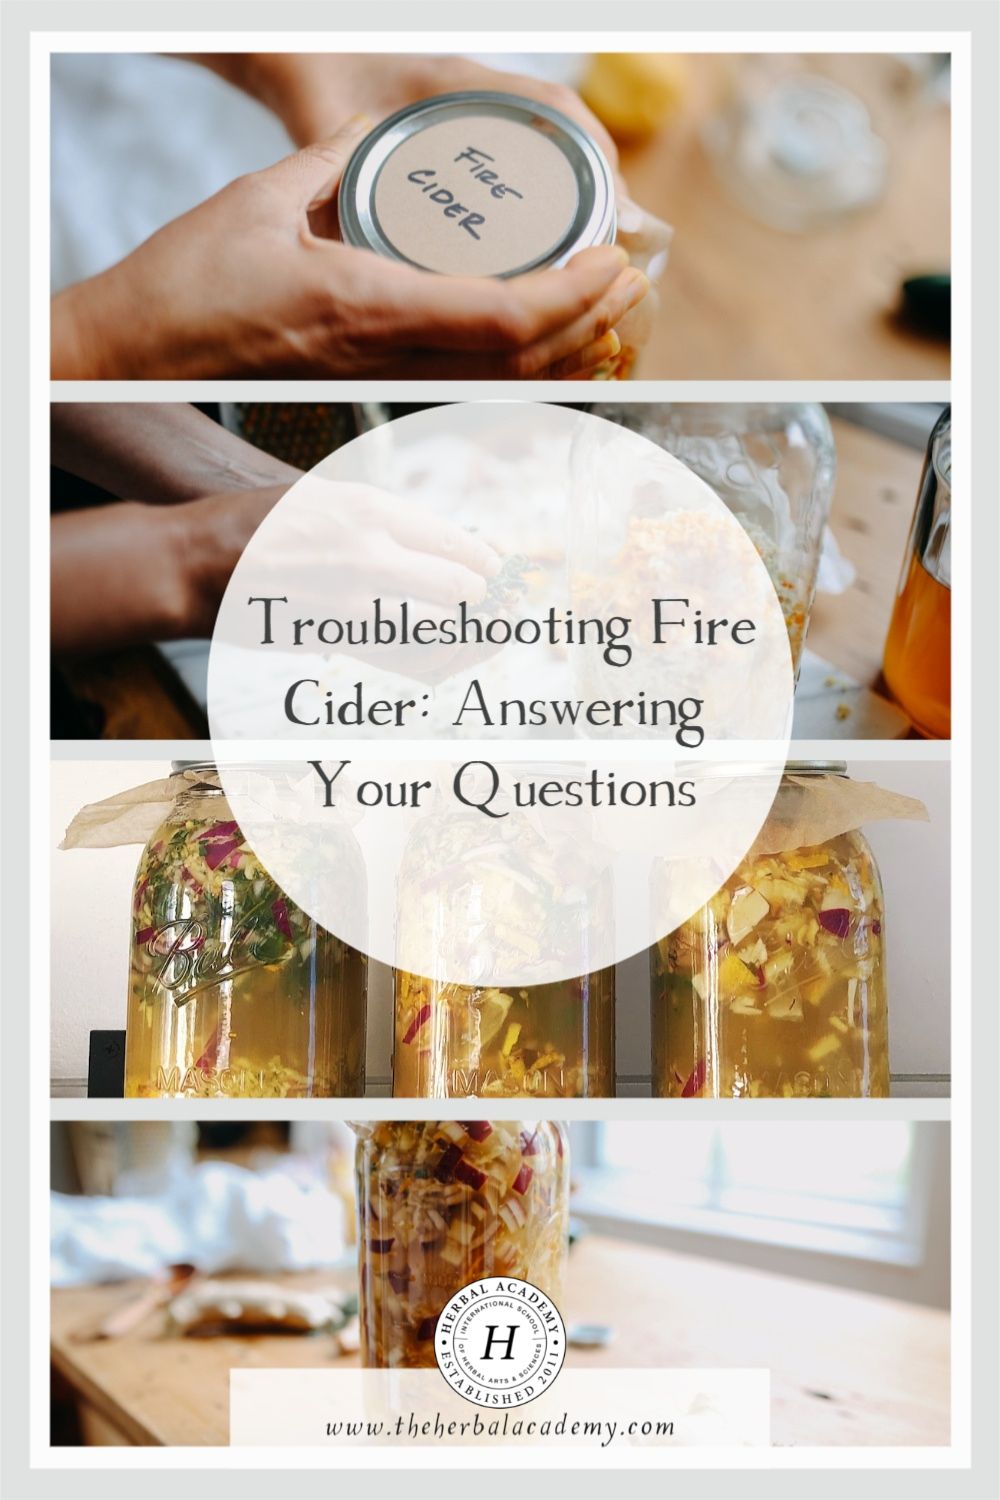 Troubleshooting Fire Cider: Answering Your Questions | Herbal Academy | We’ve received a lot of questions about fire cider, so we’ve built a comprehensive guide for troubleshooting this popular preparation!